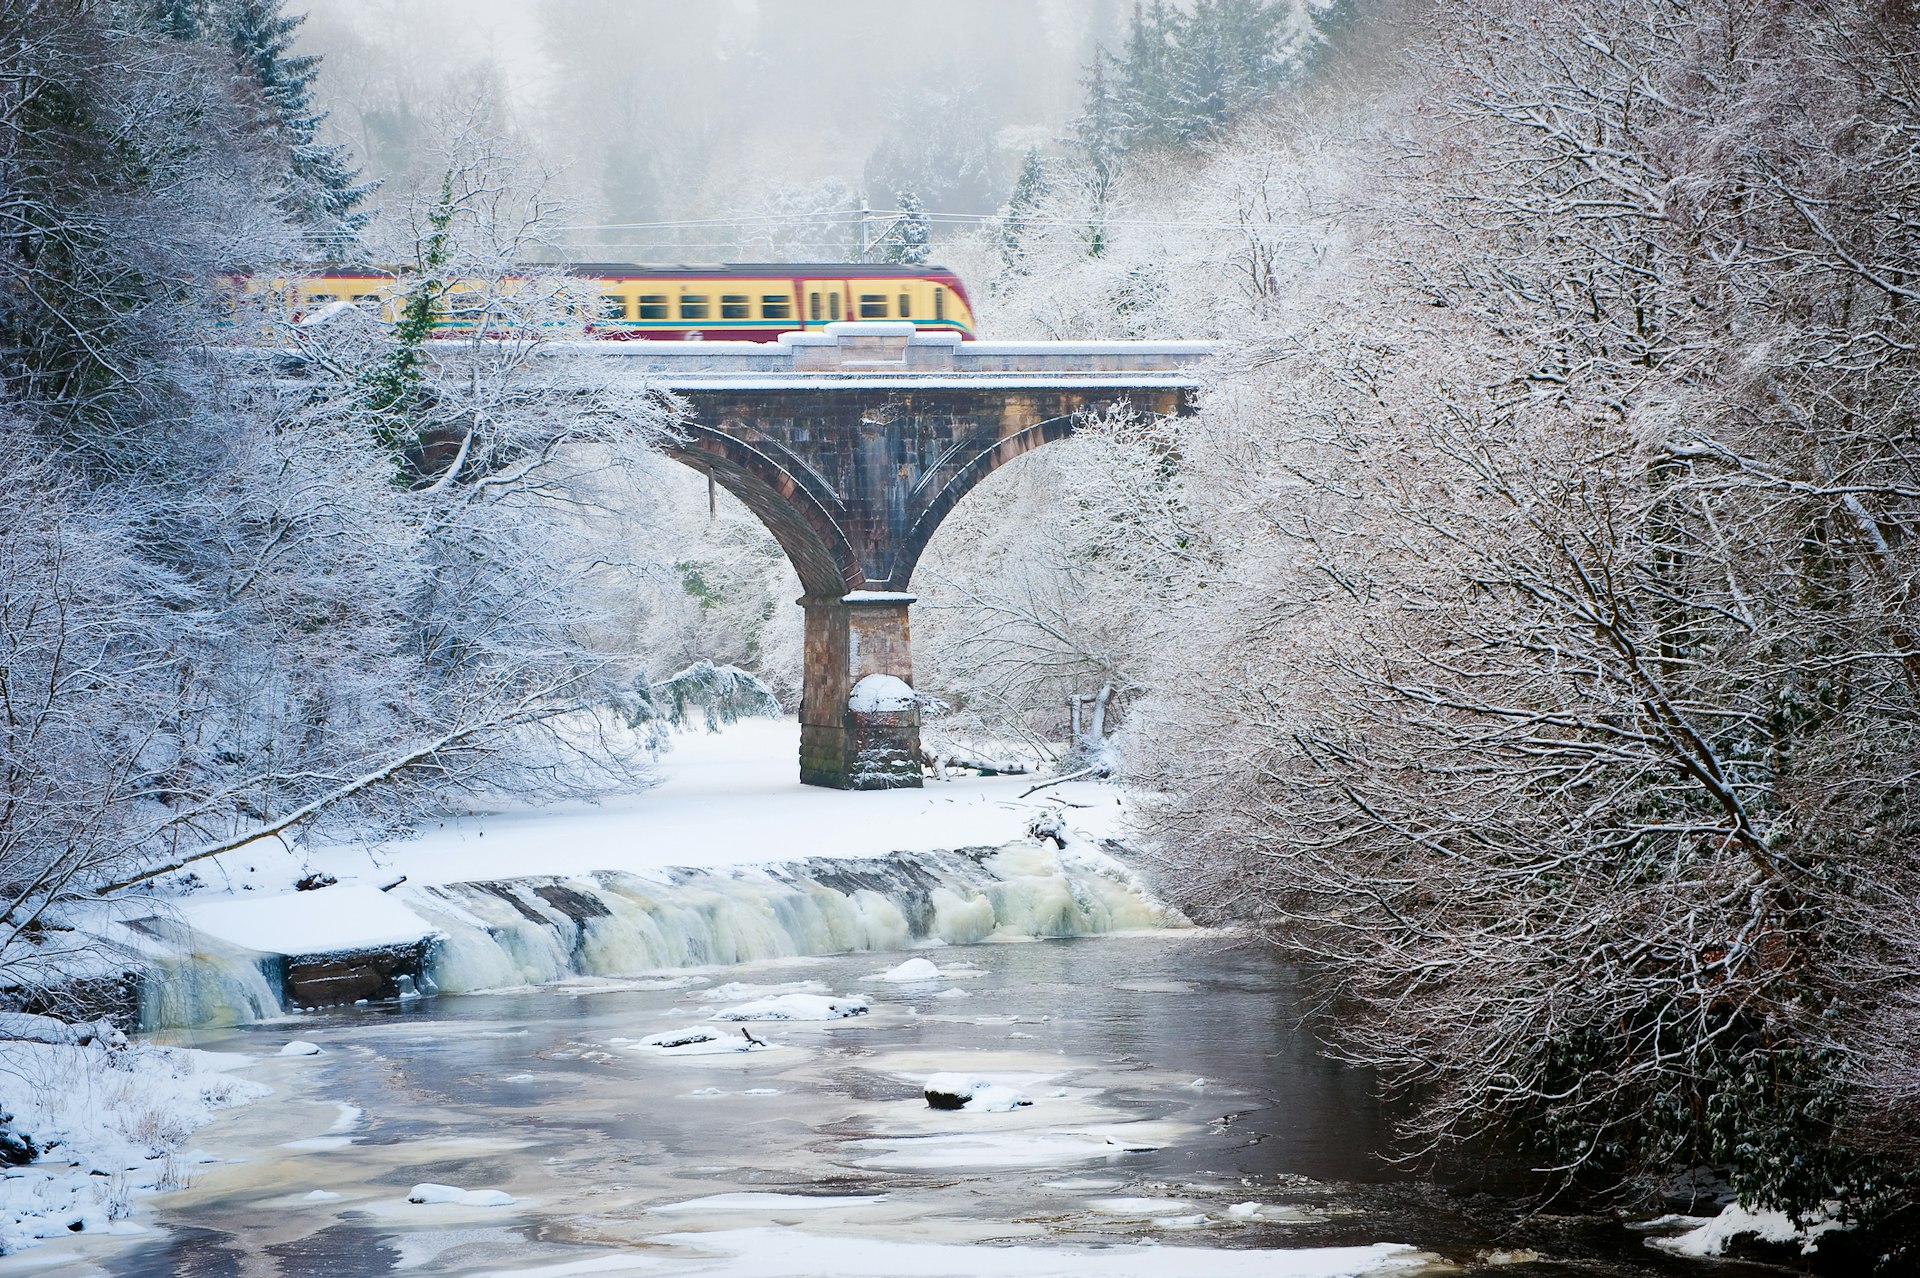 Train crossing a stone bridge over water on a frosty, snowy day